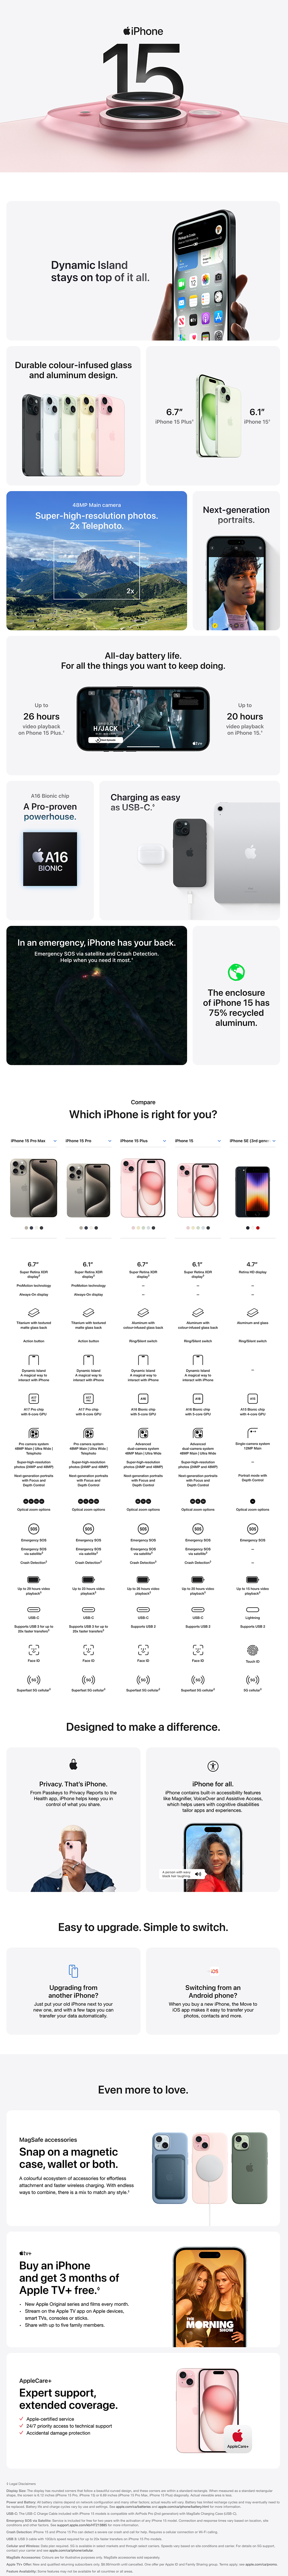 iPhone 15 and 15 Plus information